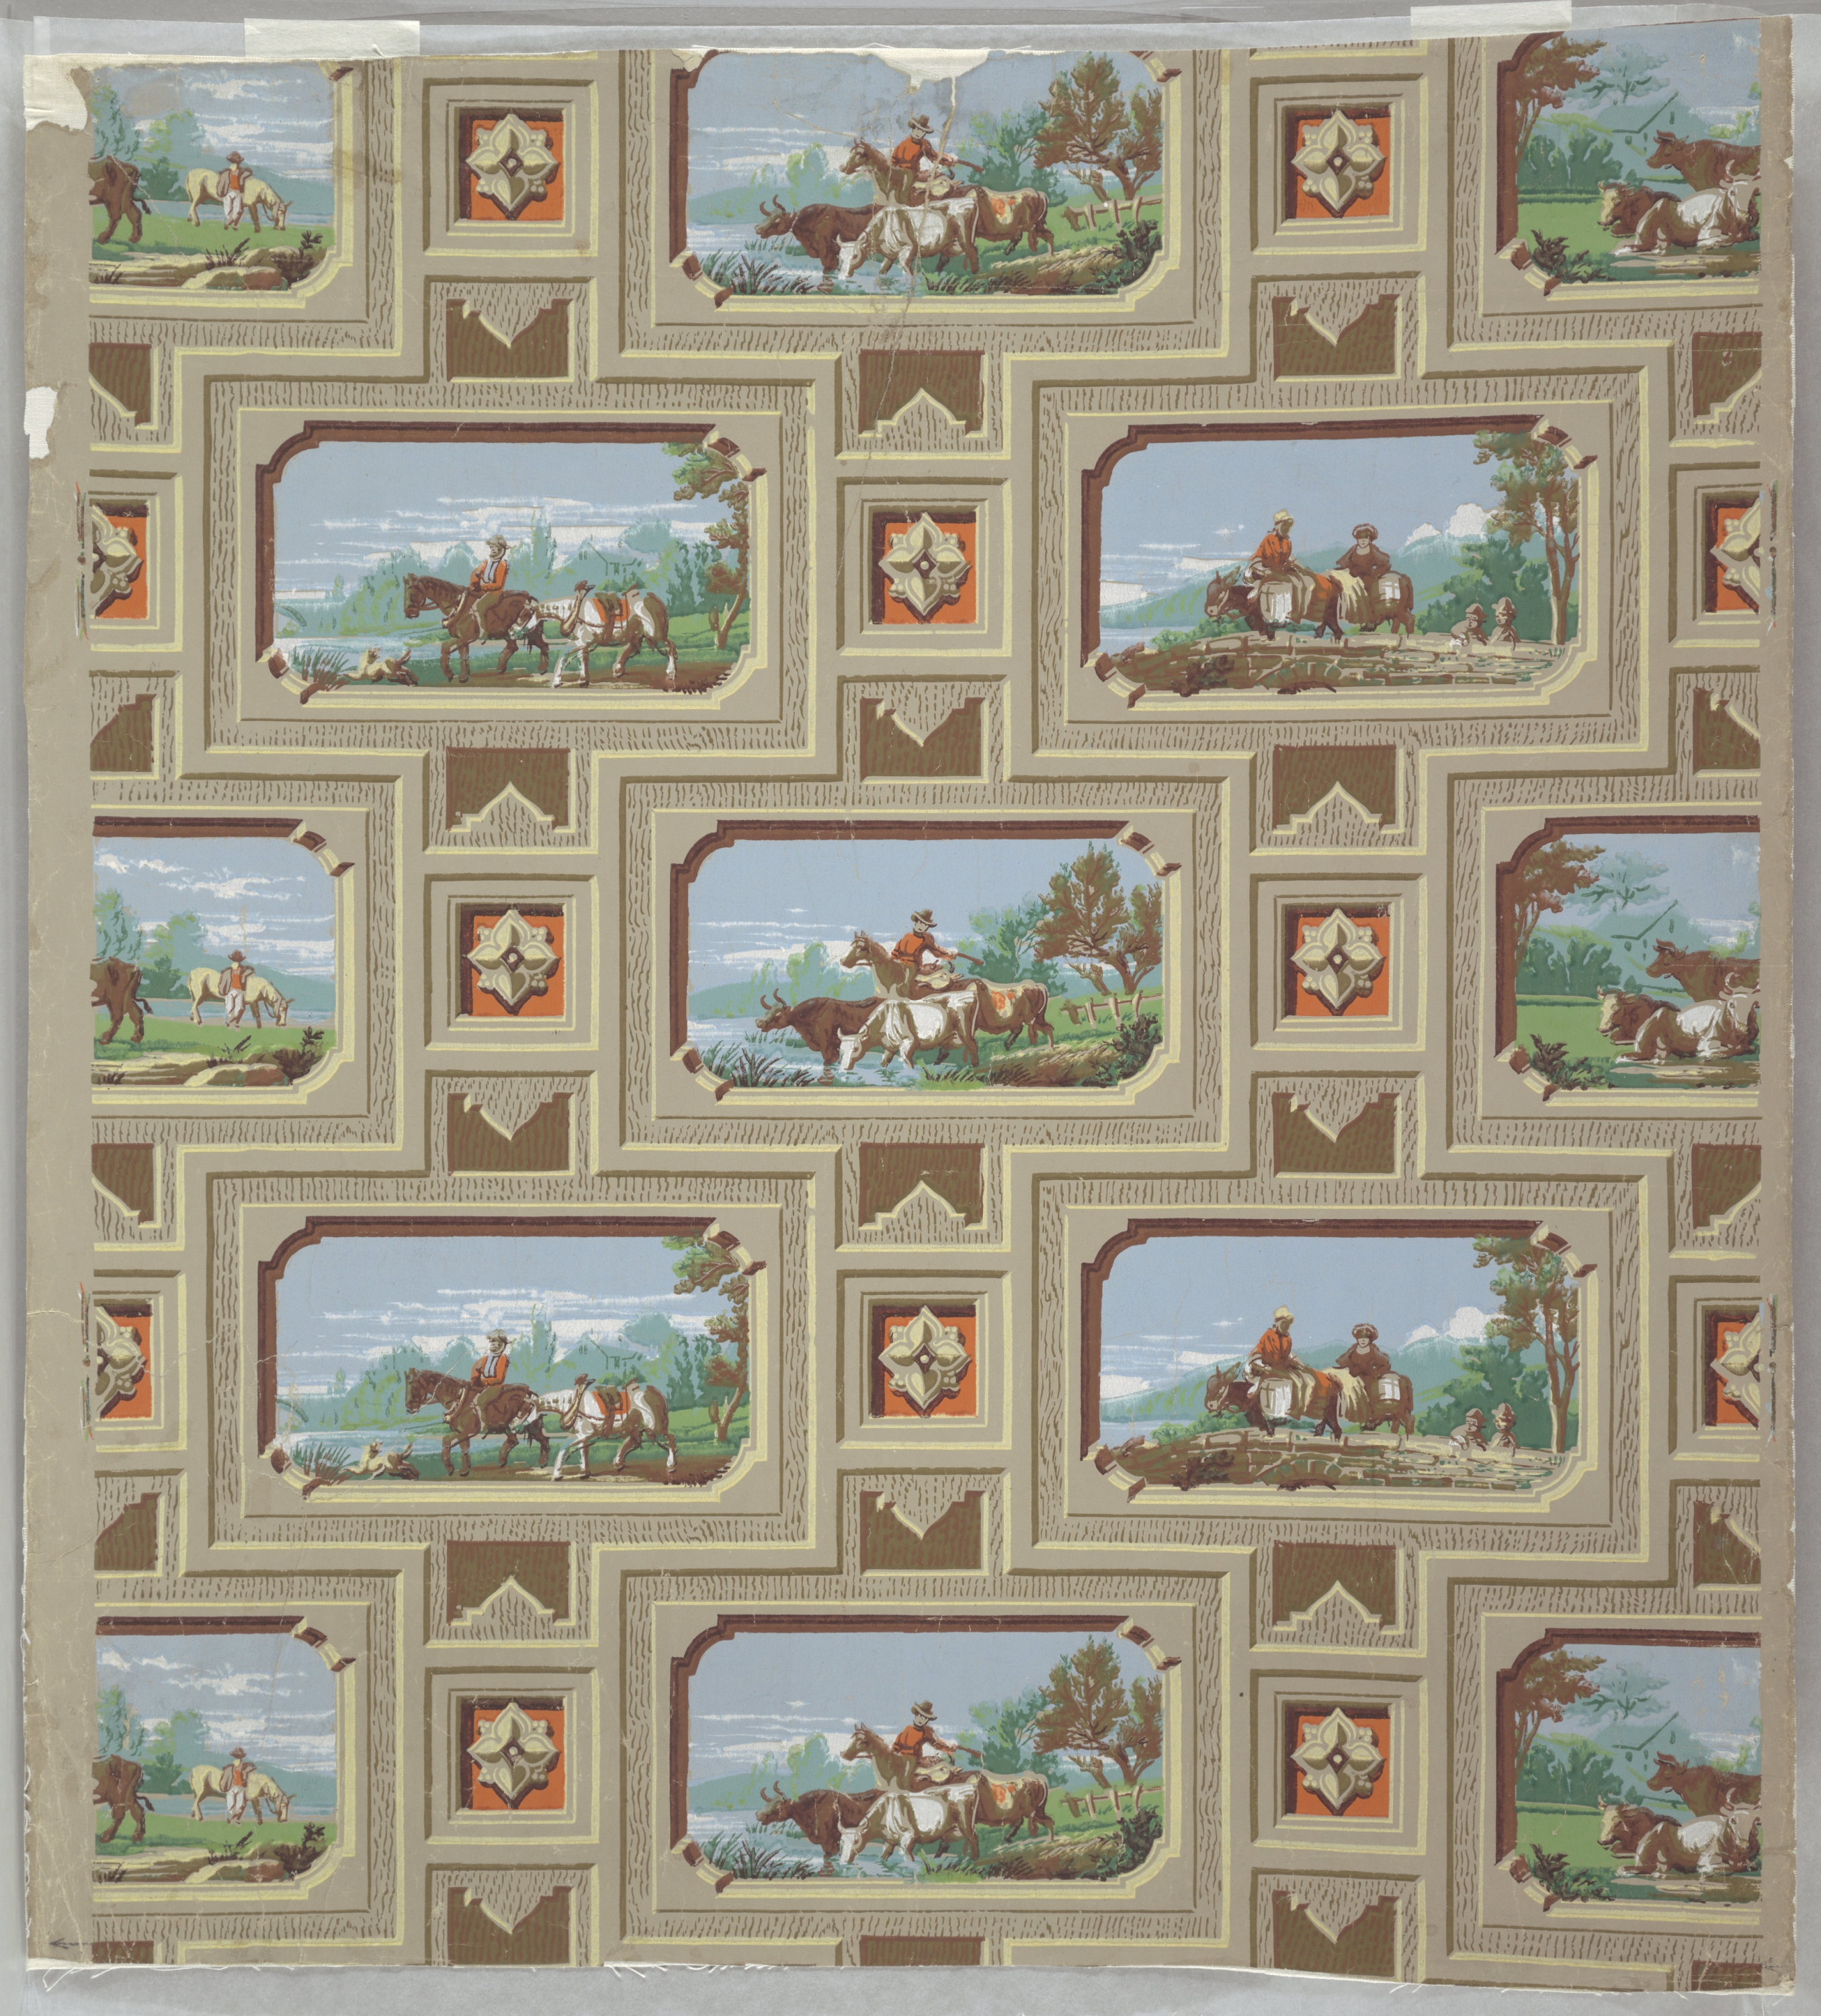 Image shows a wallpaper with postcard views of equestrian scenes. Please scroll down for further information on this object.